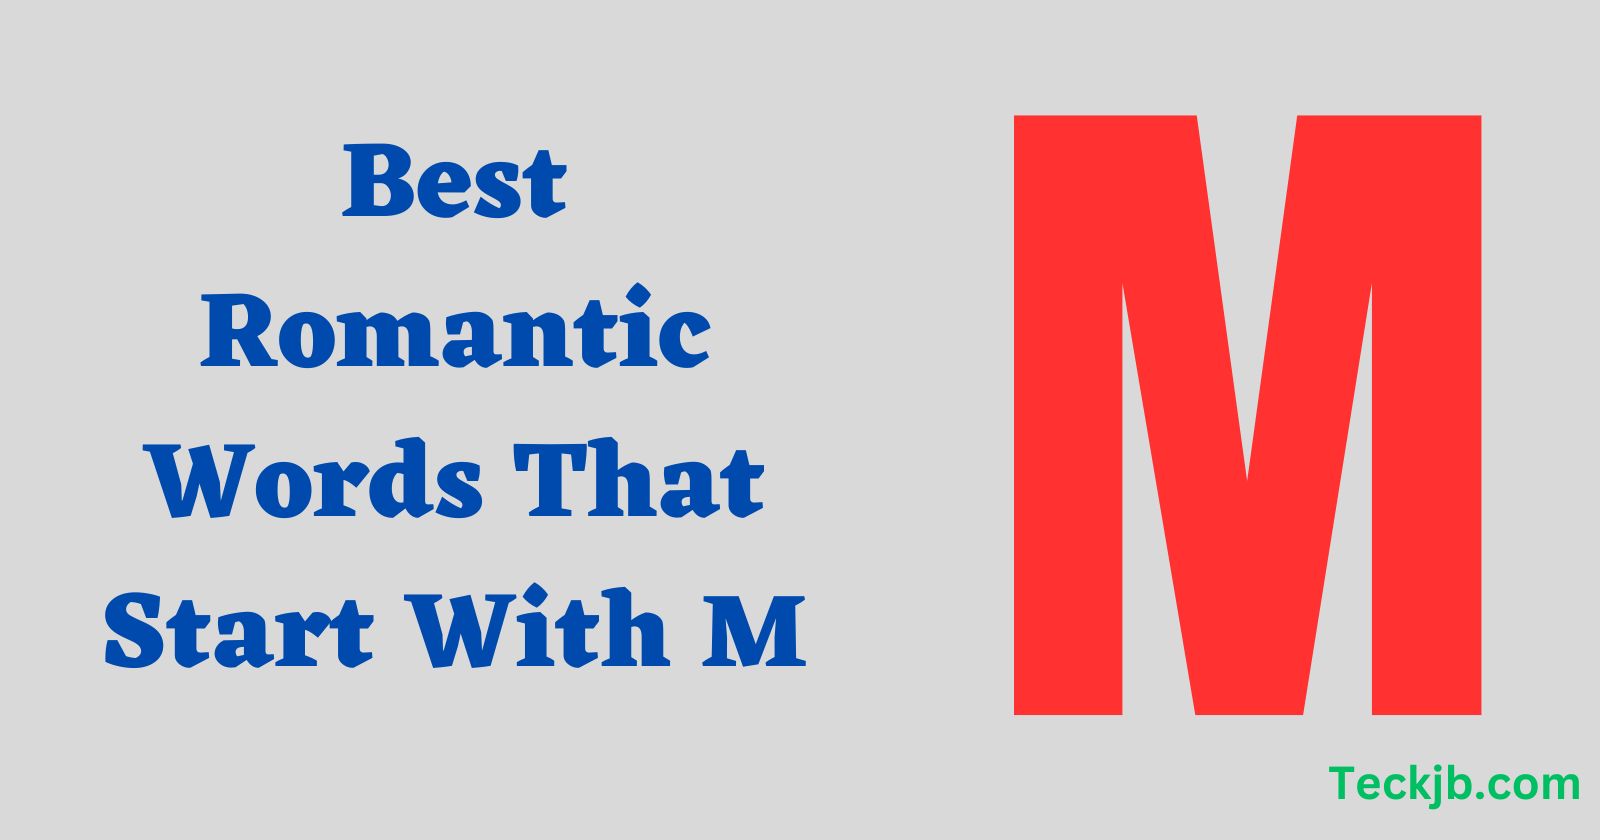 Romantic Words That Start With M